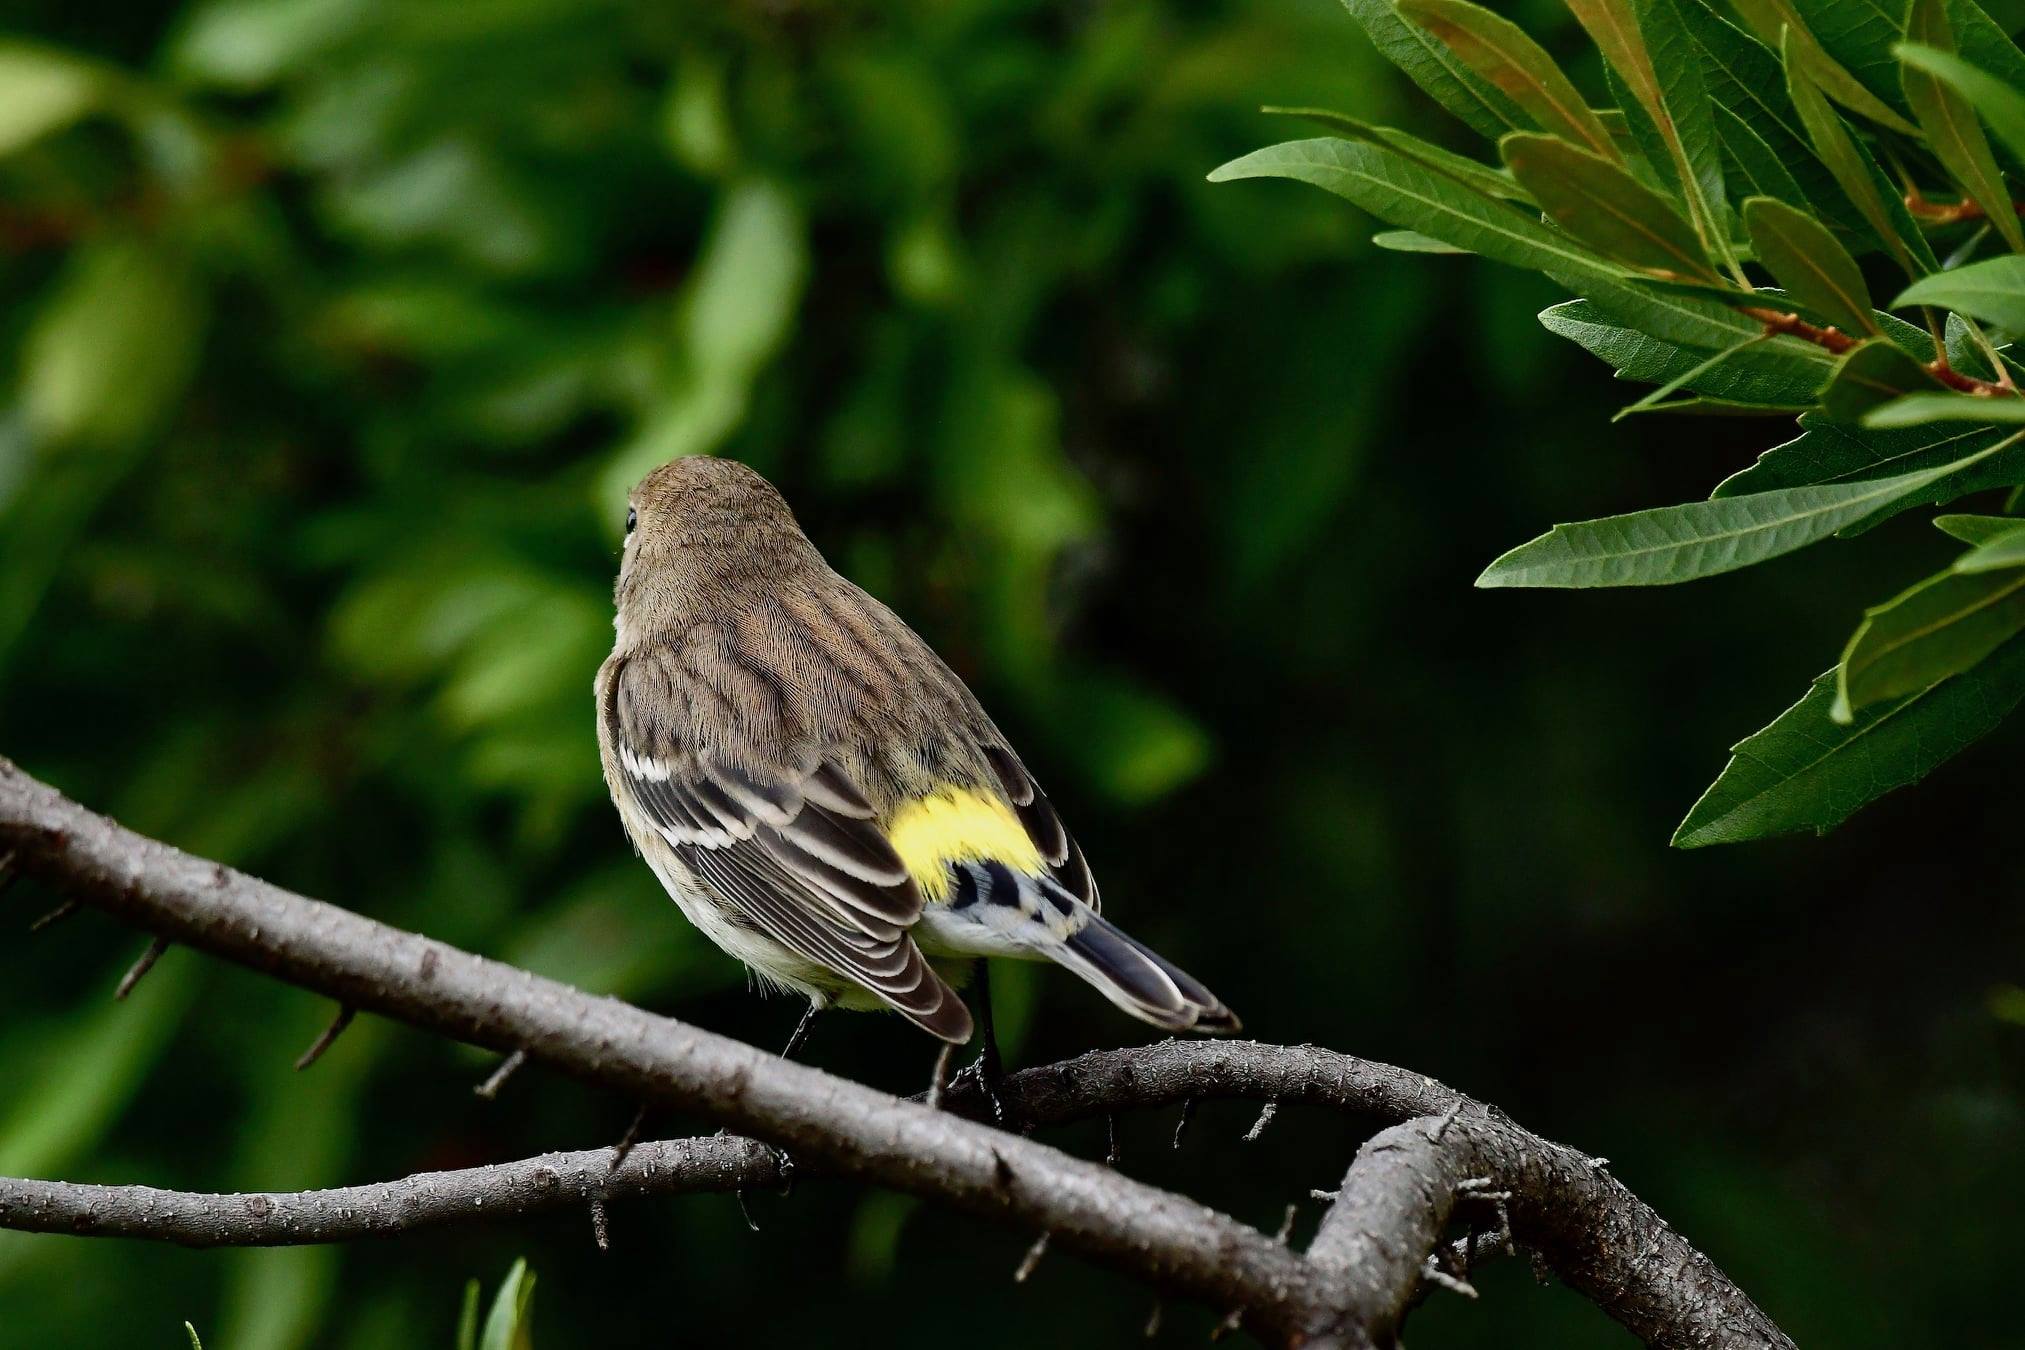 Yellow rumped warbler Railroad Park Be on the lookout Birmingham for wintering birds in town (photos)